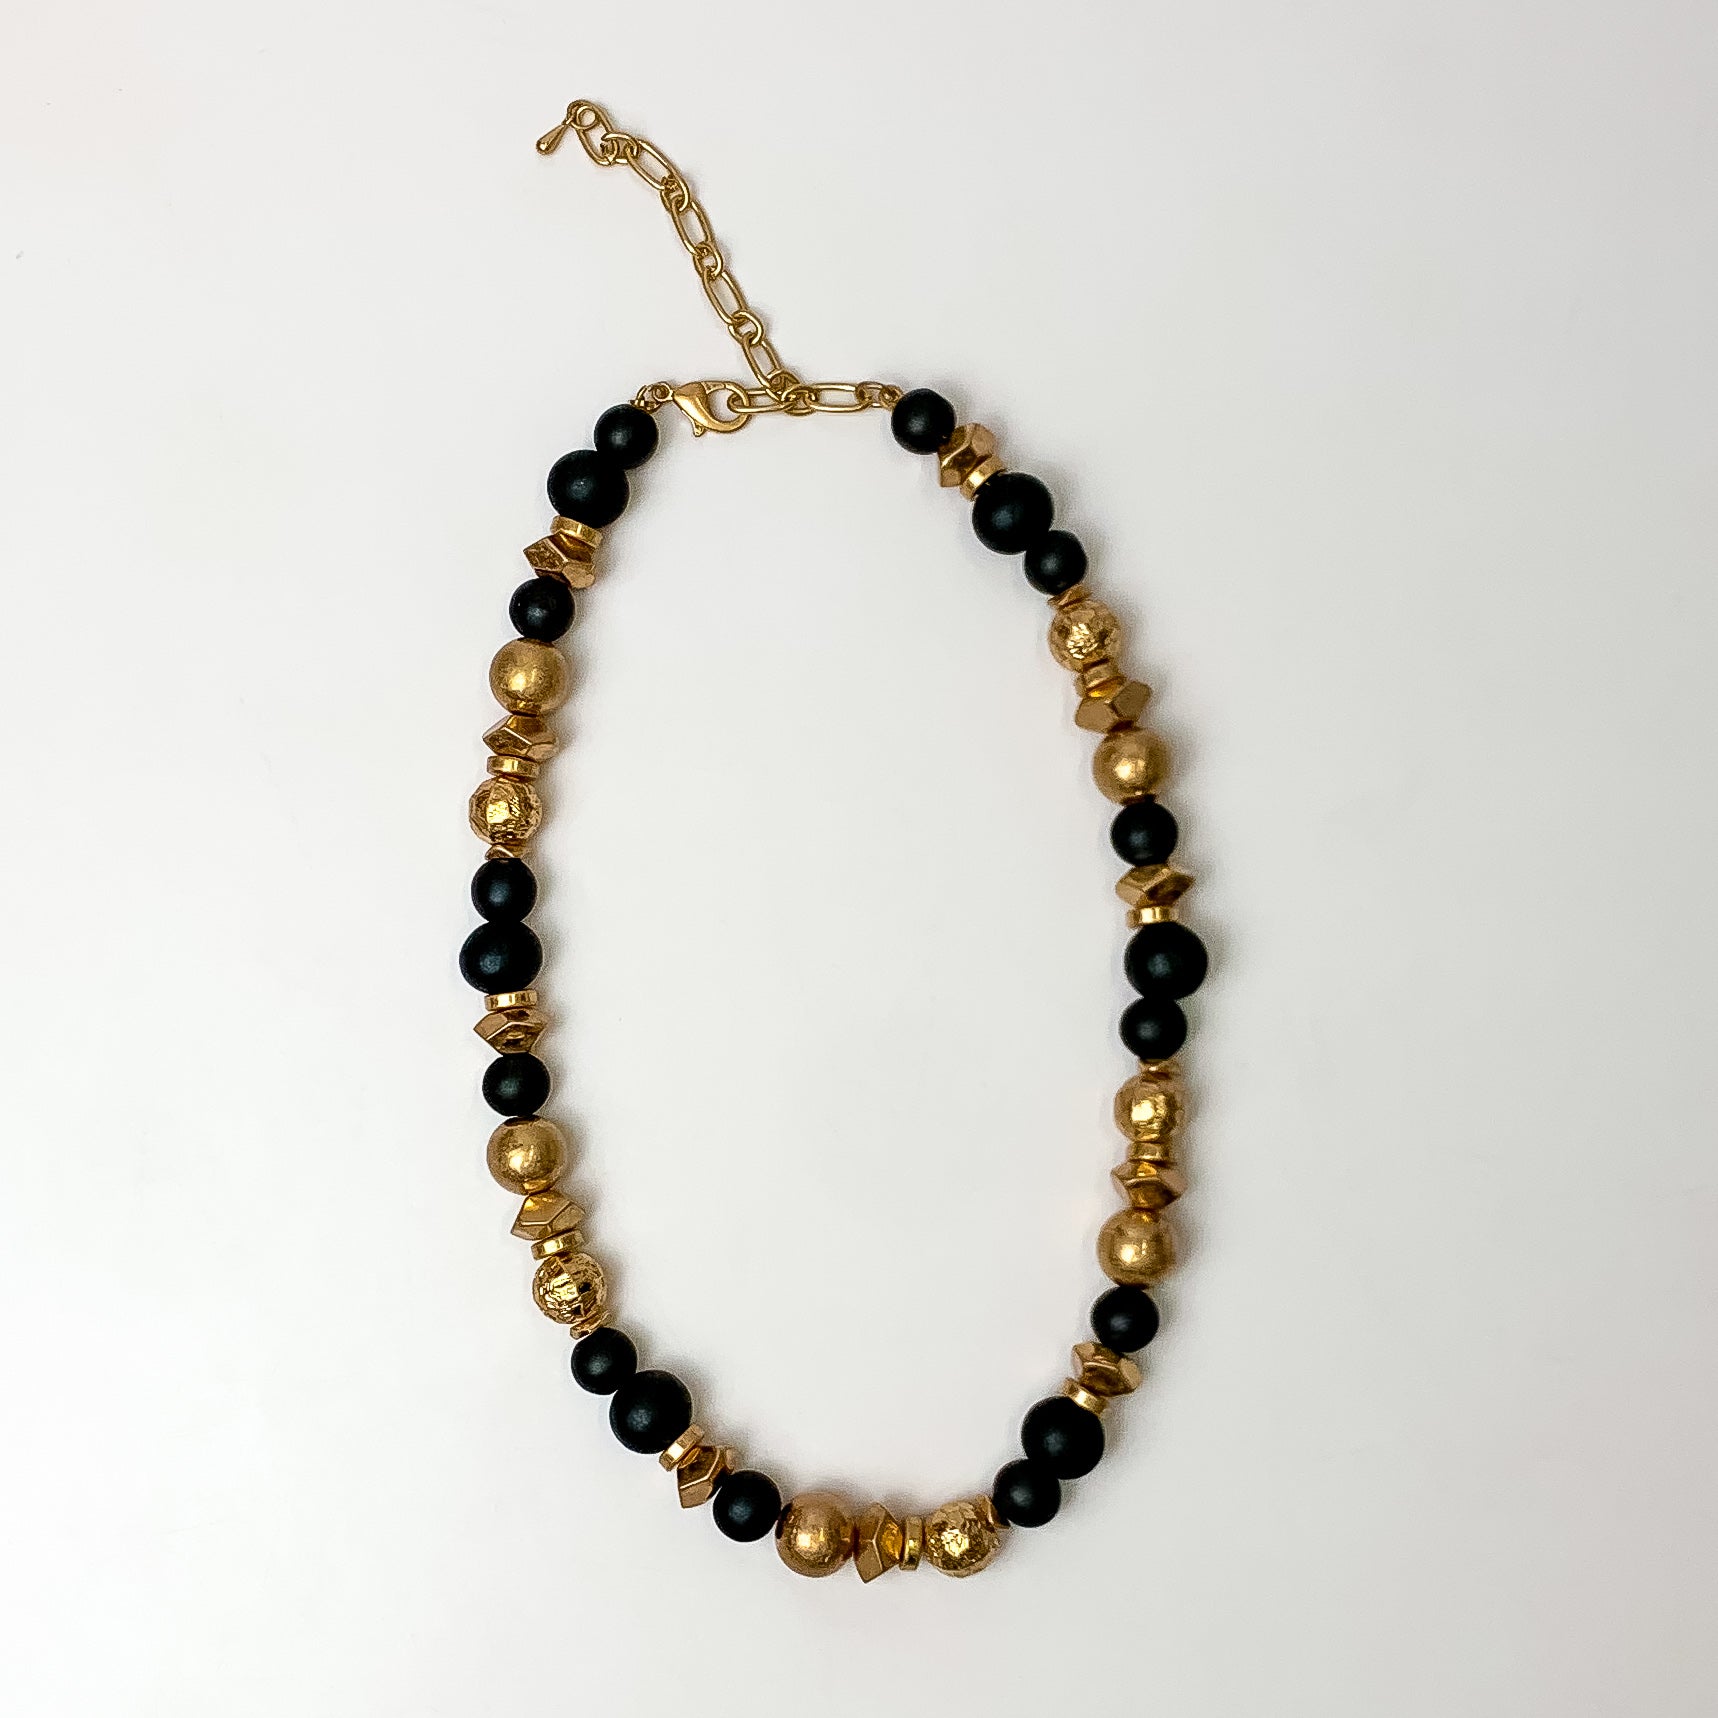 This texture beaded necklace with gold tone and black beads are placed on a white background.